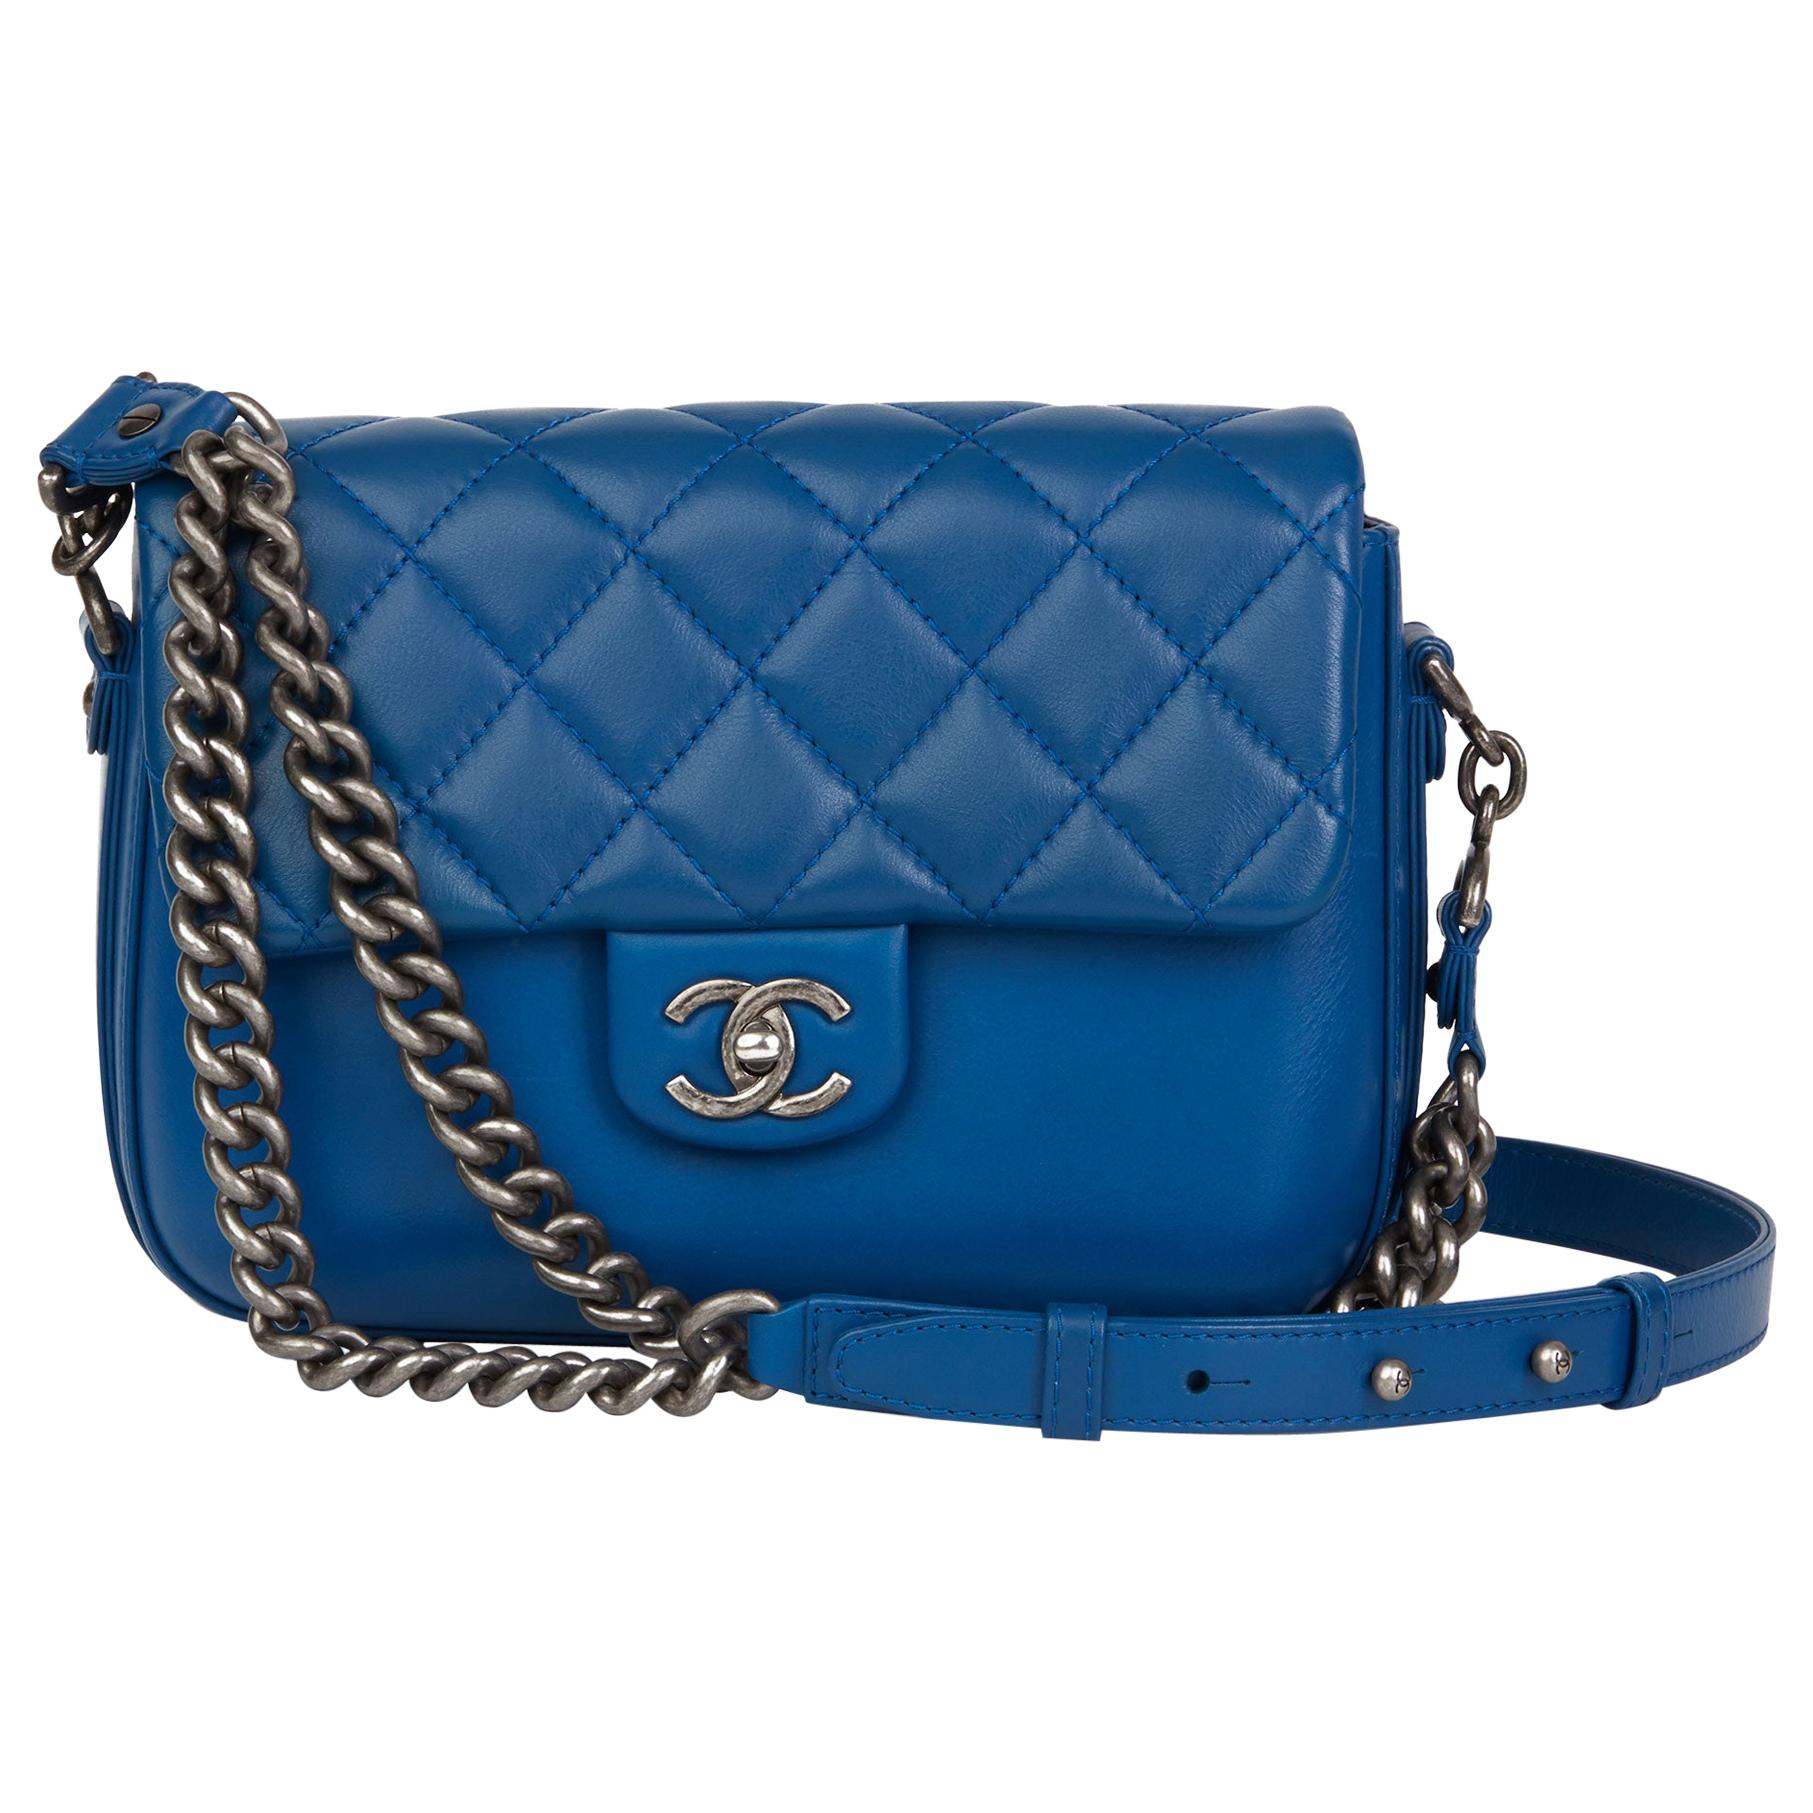 2018 Chanel Blue Quilted Calfskin Leather Classic Single Flap Bag 